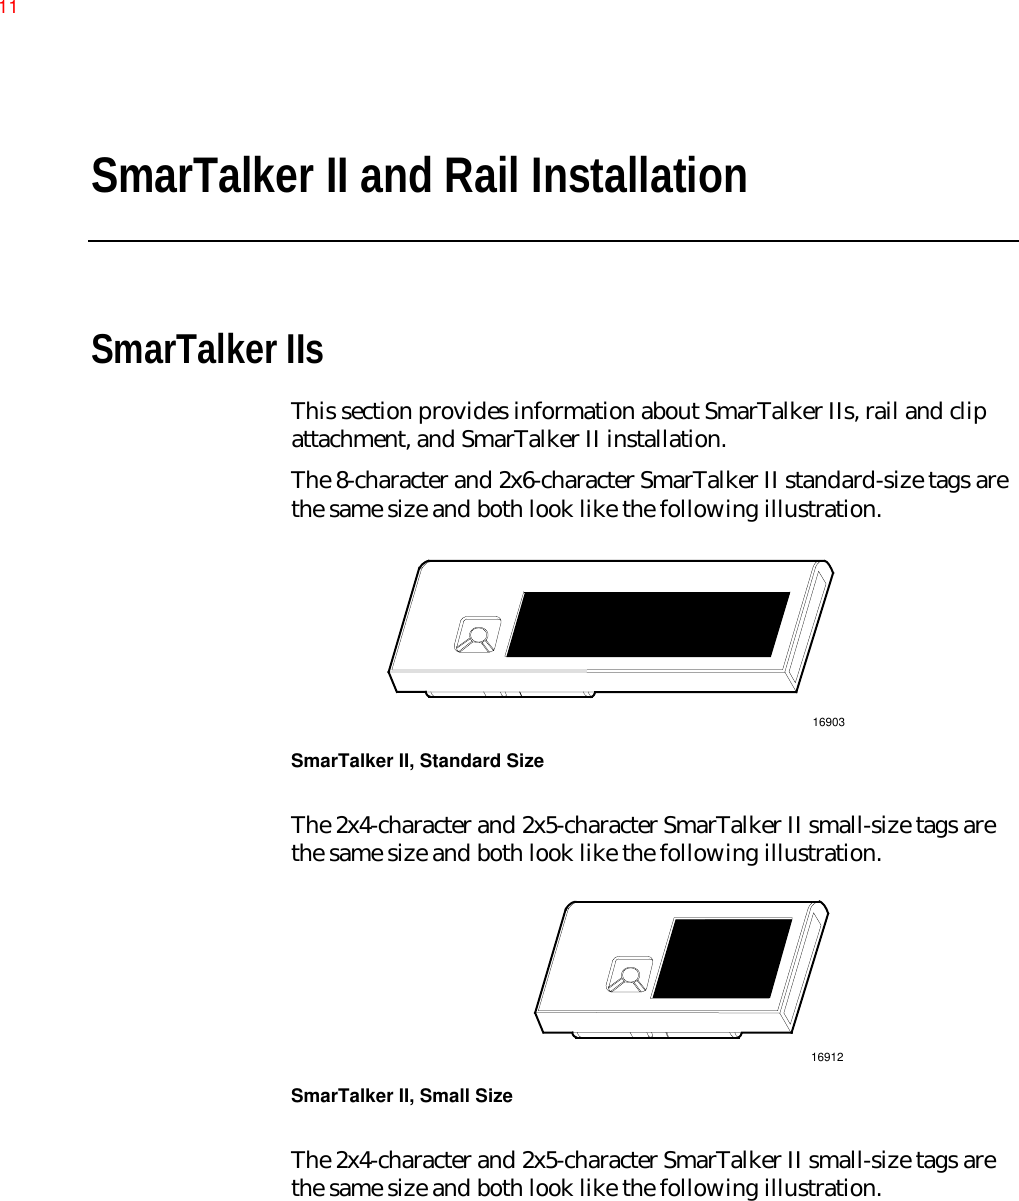 SmarTalker II and Rail InstallationSmarTalker IIsThis section provides information about SmarTalker IIs, rail and clipattachment, and SmarTalker II installation.The 8-character and 2x6-character SmarTalker II standard-size tags arethe same size and both look like the following illustration.16903SmarTalker II, Standard SizeThe 2x4-character and 2x5-character SmarTalker II small-size tags arethe same size and both look like the following illustration.16912SmarTalker II, Small SizeThe 2x4-character and 2x5-character SmarTalker II small-size tags arethe same size and both look like the following illustration.11